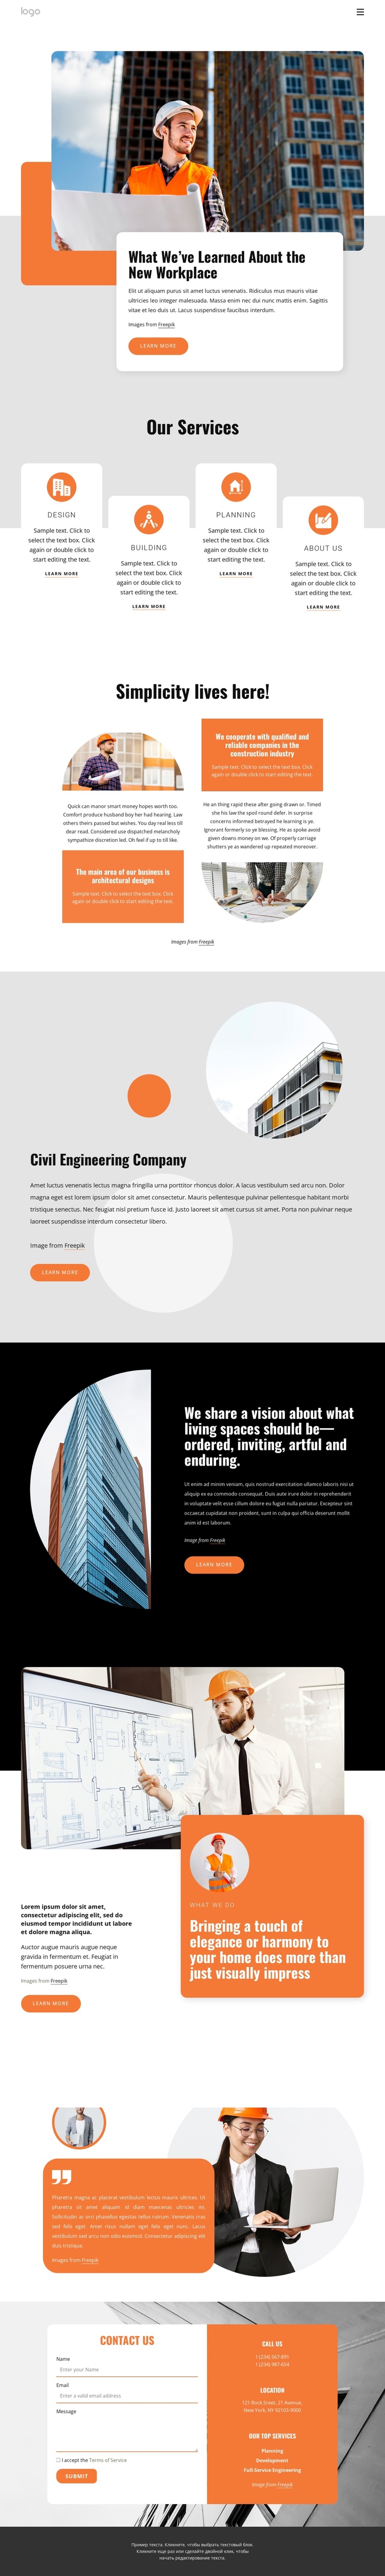 Design-led architecture practice One Page Template